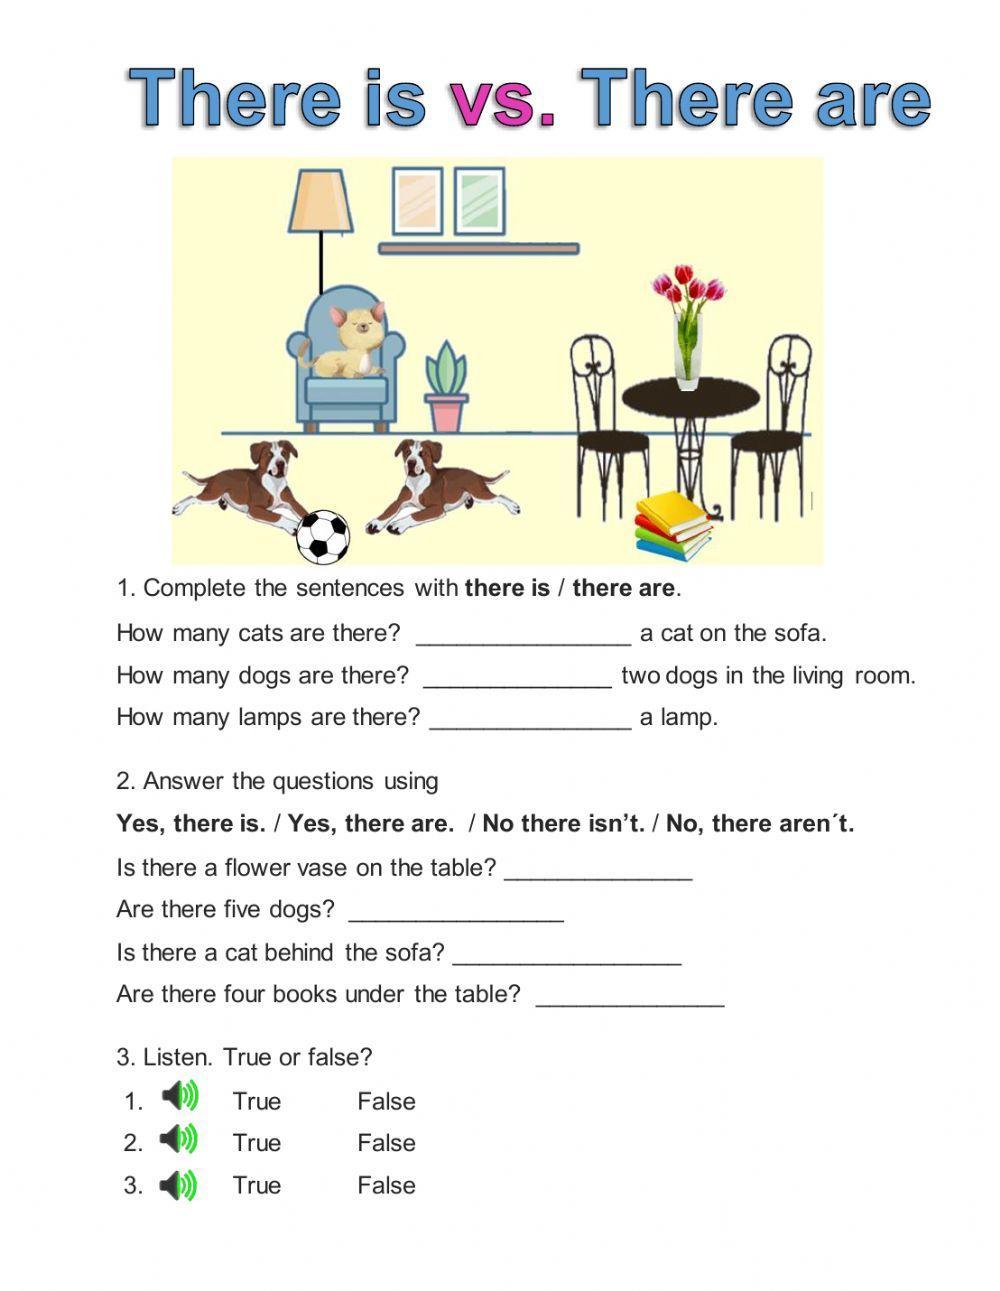 There is vs. There are worksheet | Live Worksheets